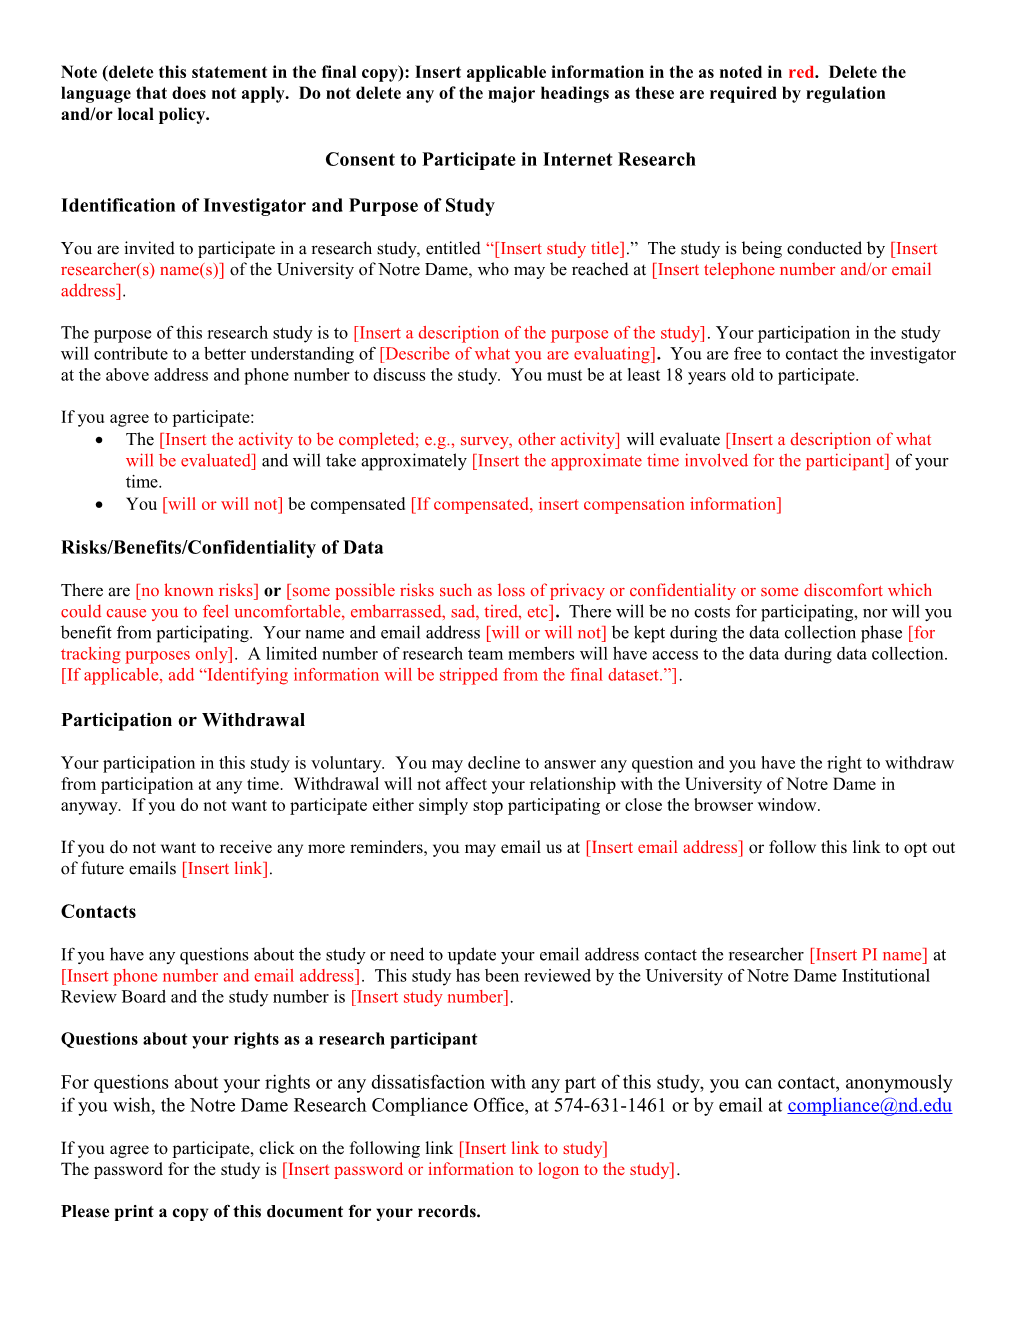 Consent Cover Letter for Survey Research s1